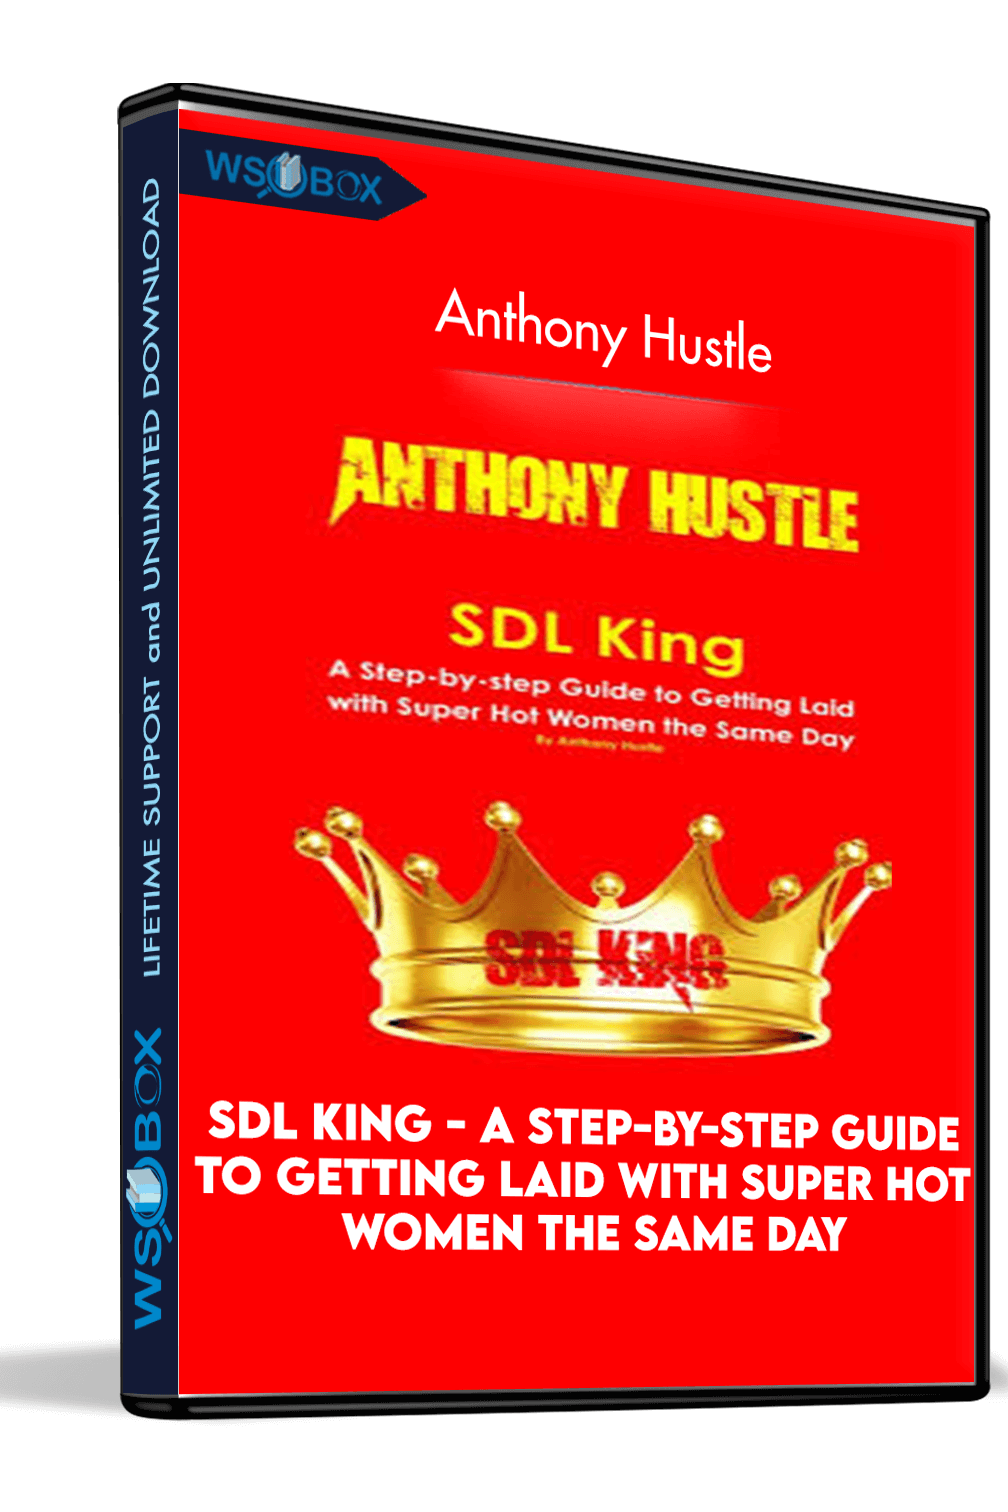 sdl-king-a-step-by-step-guide-to-getting-laid-with-super-hot-women-the-same-day-anthony-hustle